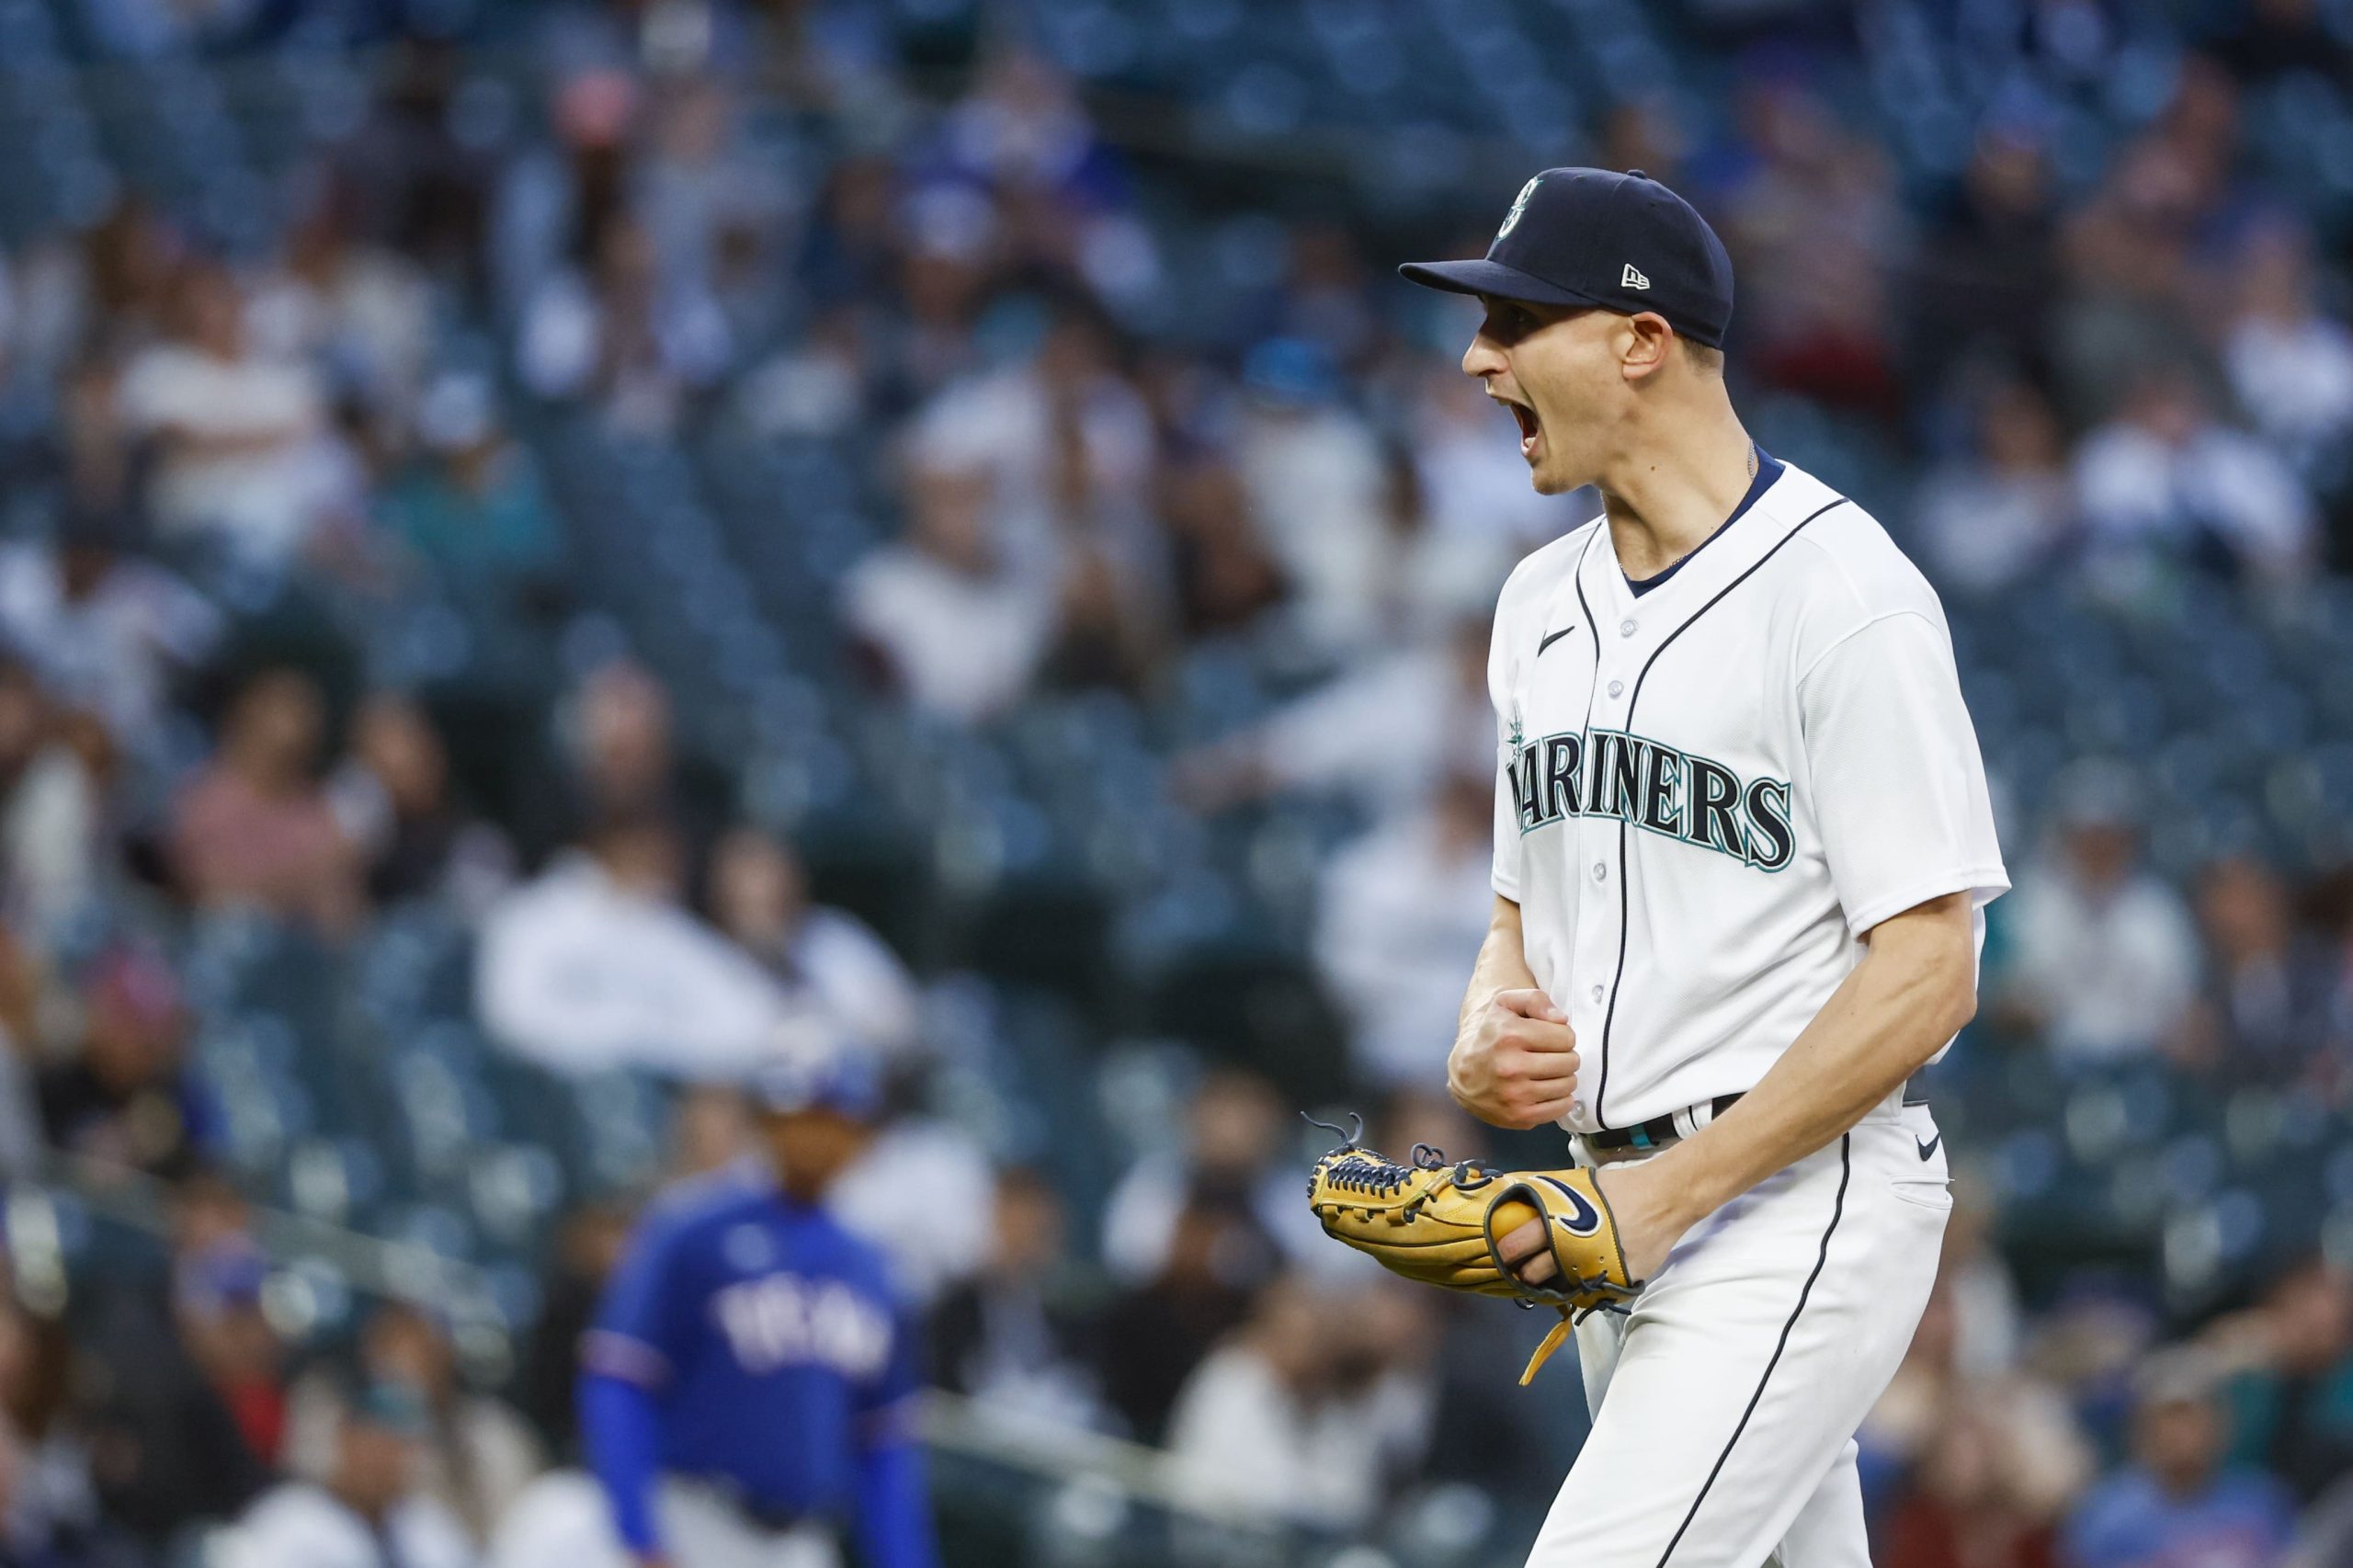 Mariners' first half in a nutshell: Standout pitching, subpar